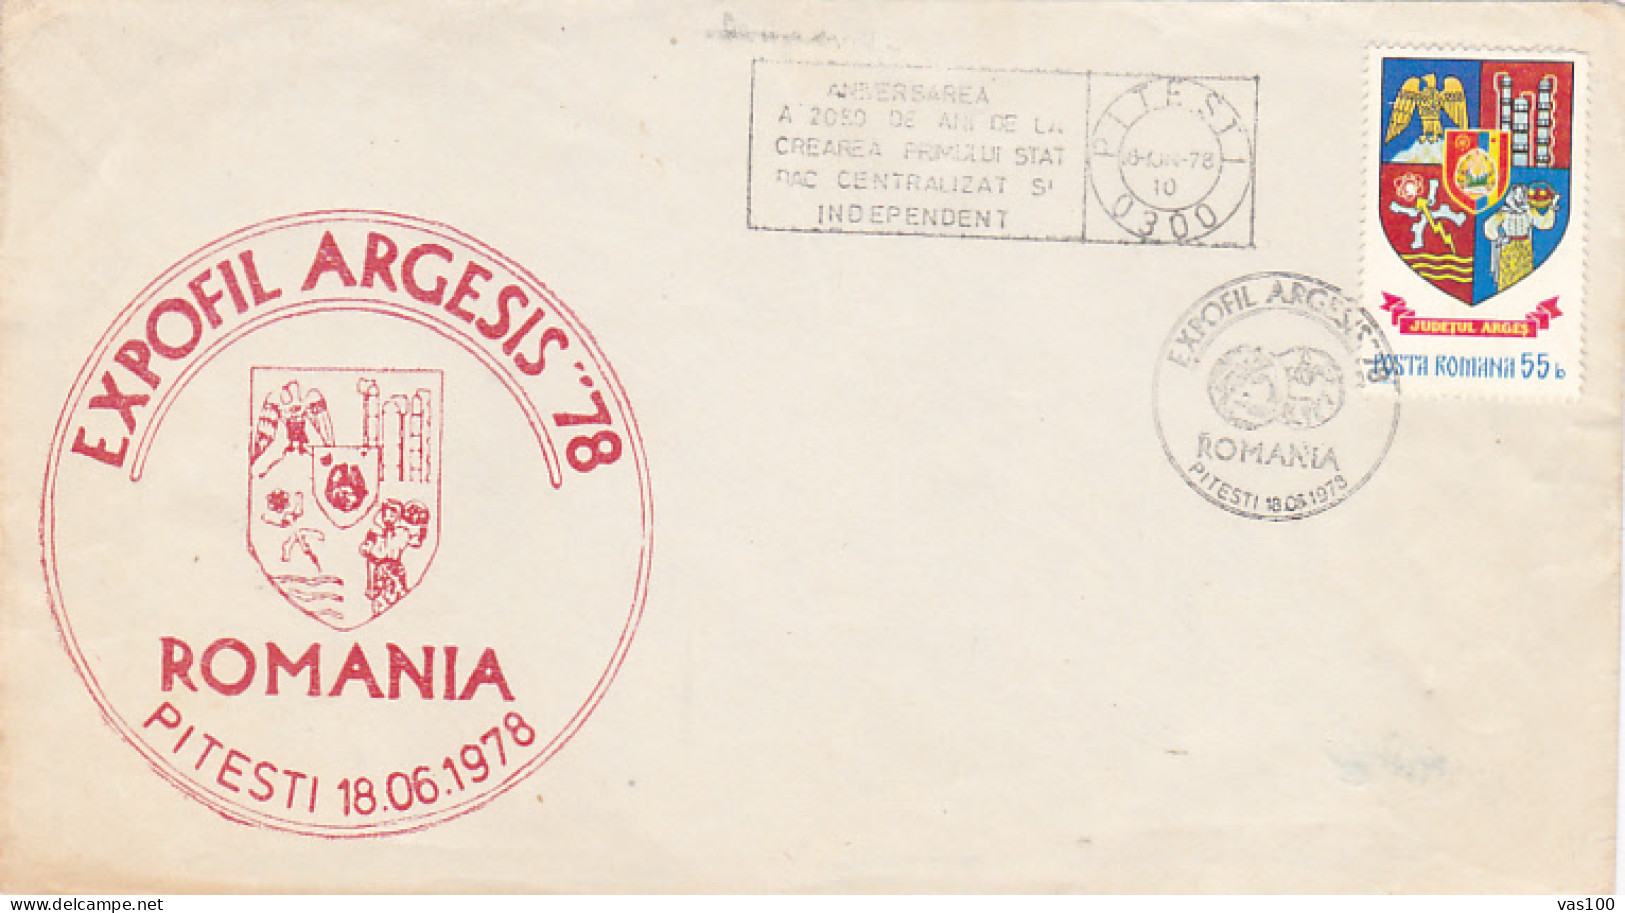 DACIAN STATE ANNIVERSARY POSTMARKS, PITESTIPHILATELIC EXHIBITION SPECIAL COVER, 1978, ROMANIA - Covers & Documents